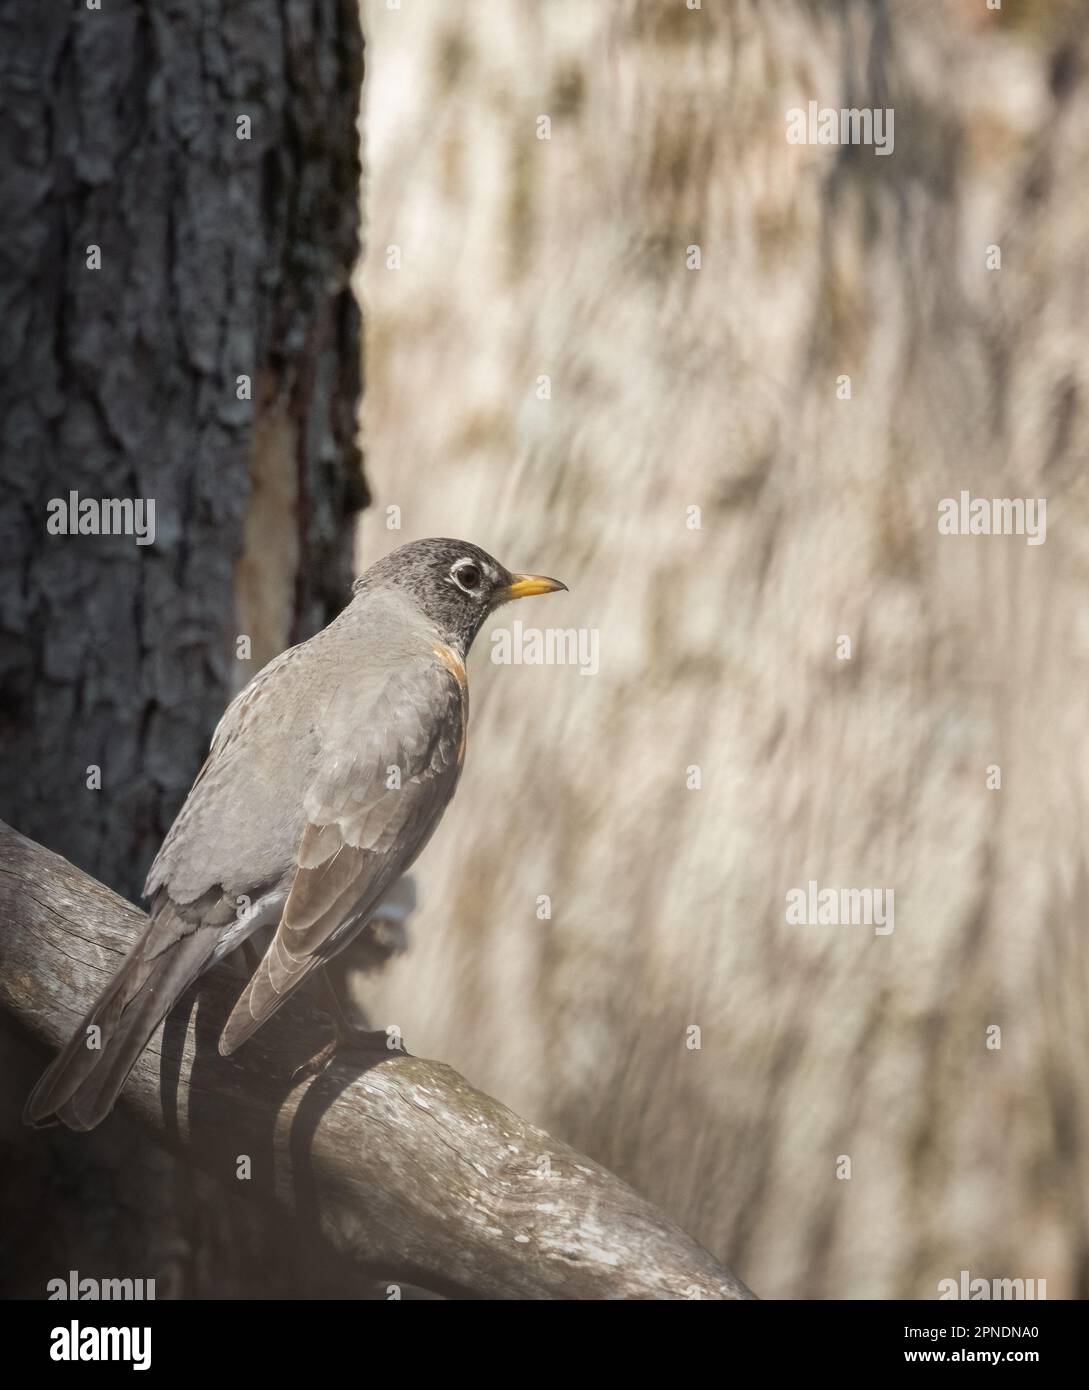 An American Robin in springtime with a wood texture background in a forest Stock Photo